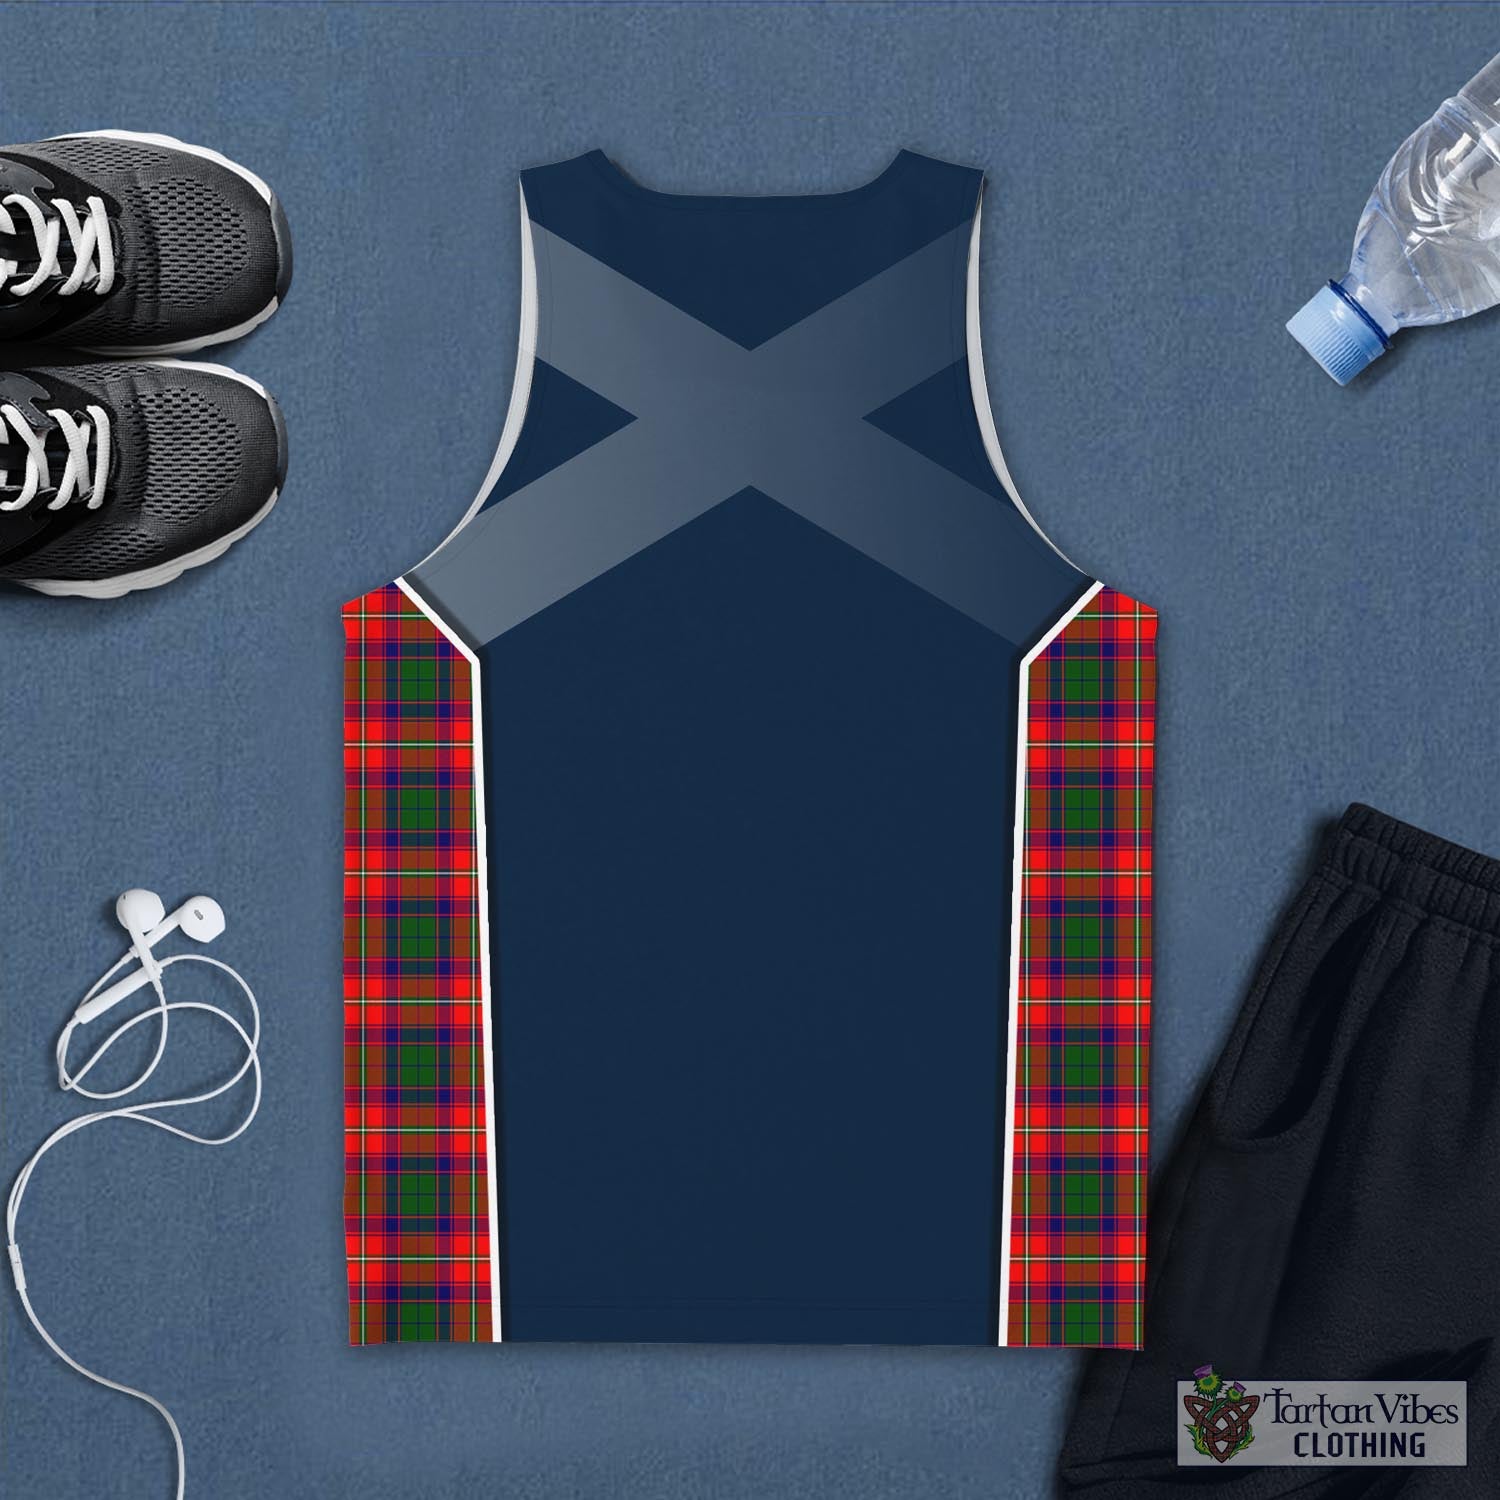 Tartan Vibes Clothing Charteris Tartan Men's Tanks Top with Family Crest and Scottish Thistle Vibes Sport Style